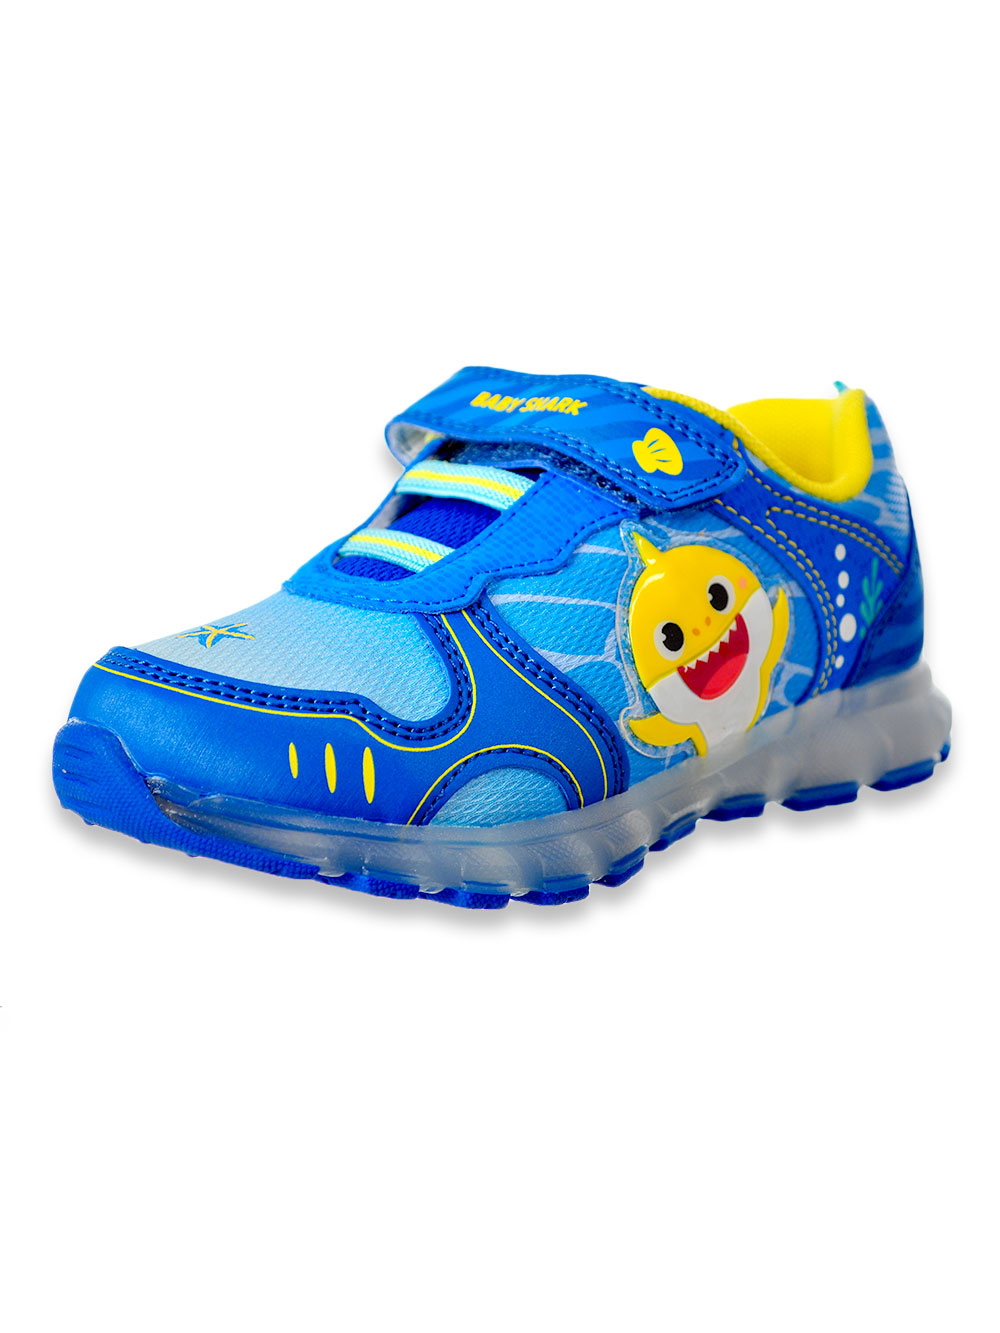 Boys' Light-Up Sneakers by Pinkfong 